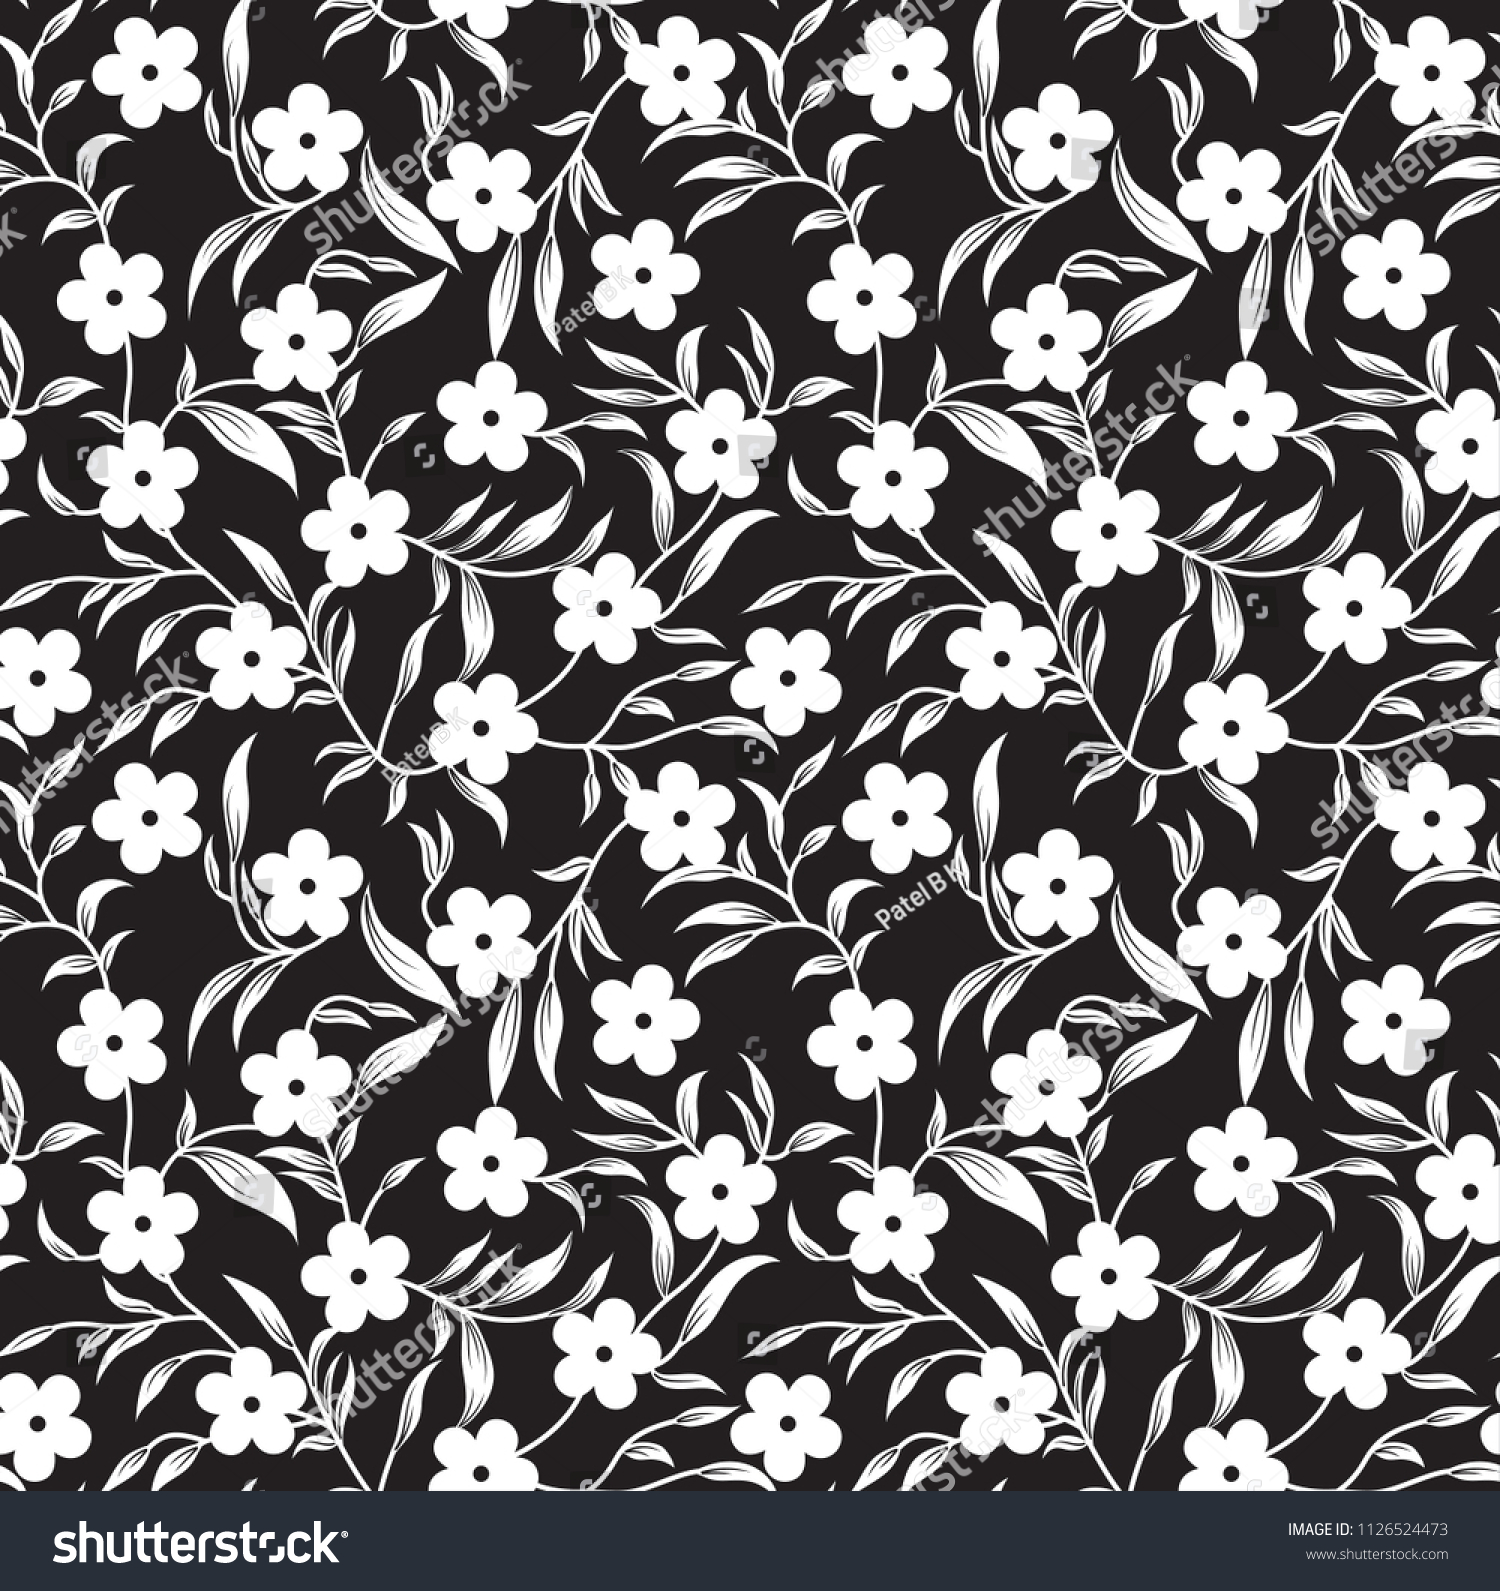 Cute Black White Small Flower Pattern Stock Vector (Royalty Free ...